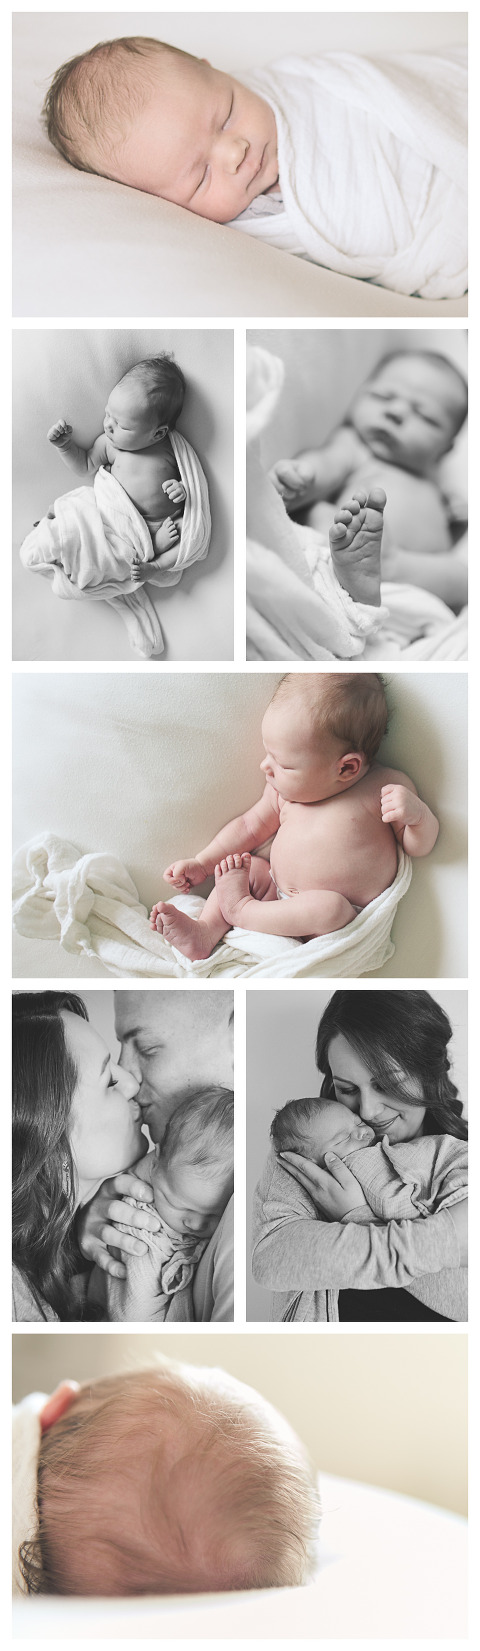 Baby Dash with parents at Lifestyle newborn session by Hailey Haberman in Ellensburg WA